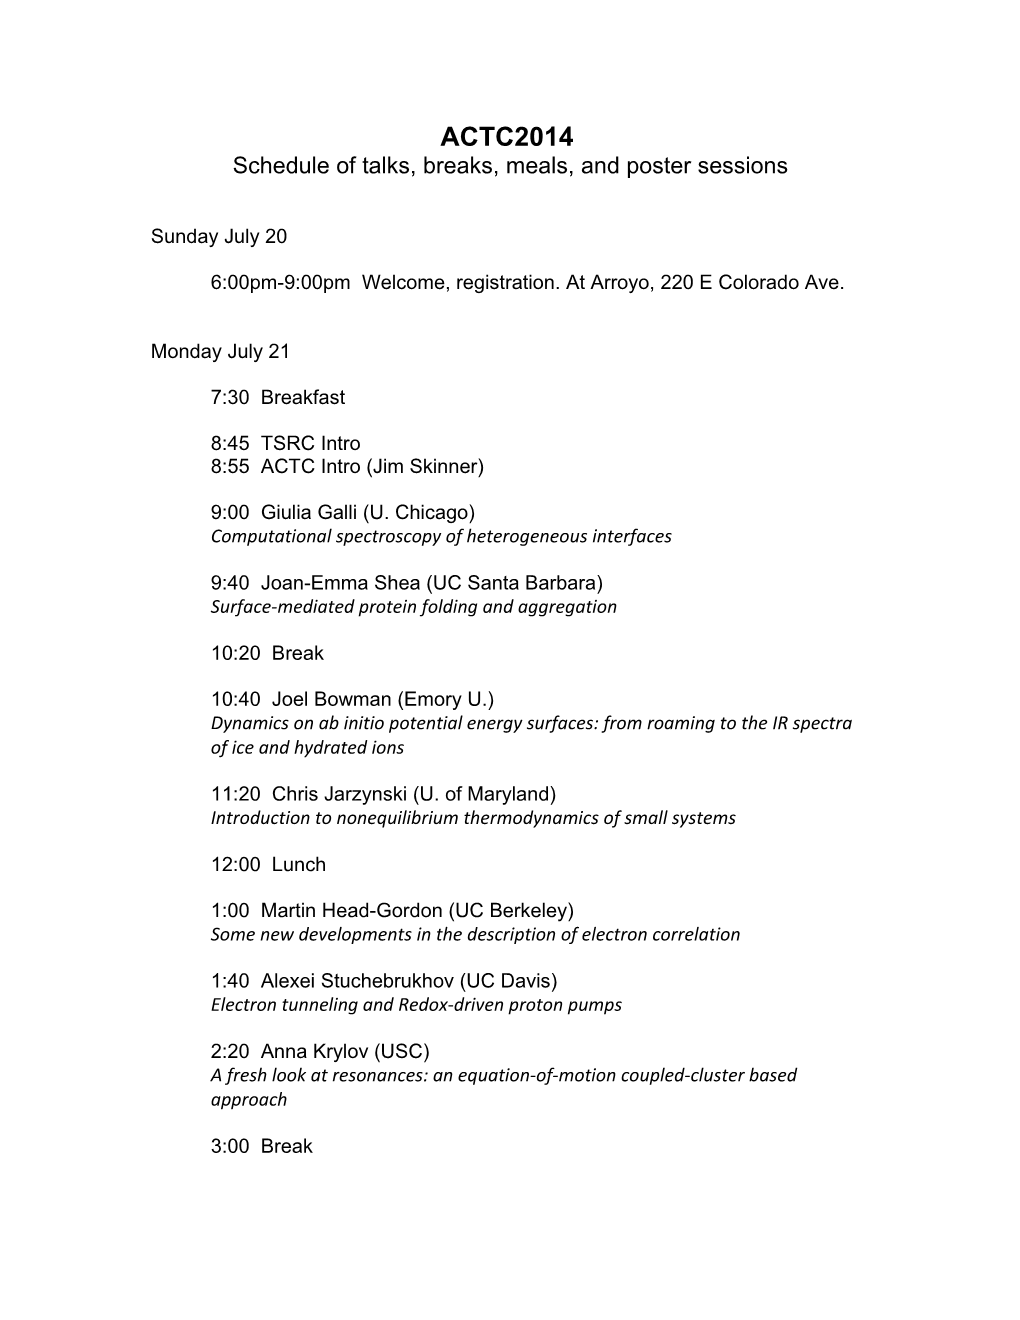 Schedule of Talks, Breaks, Meals, and Poster Sessions